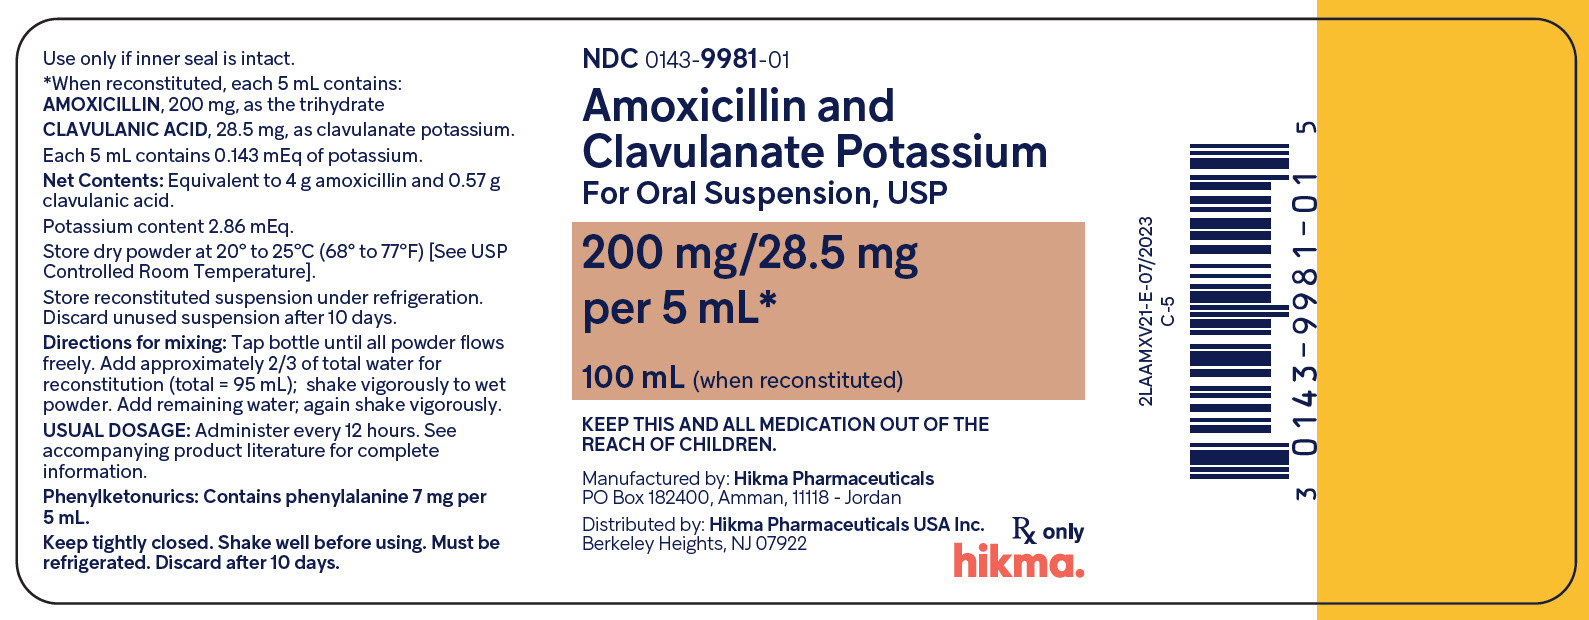 200 mg/28.5 mg per 5 mL 100 mL when reconstituted bottle label image